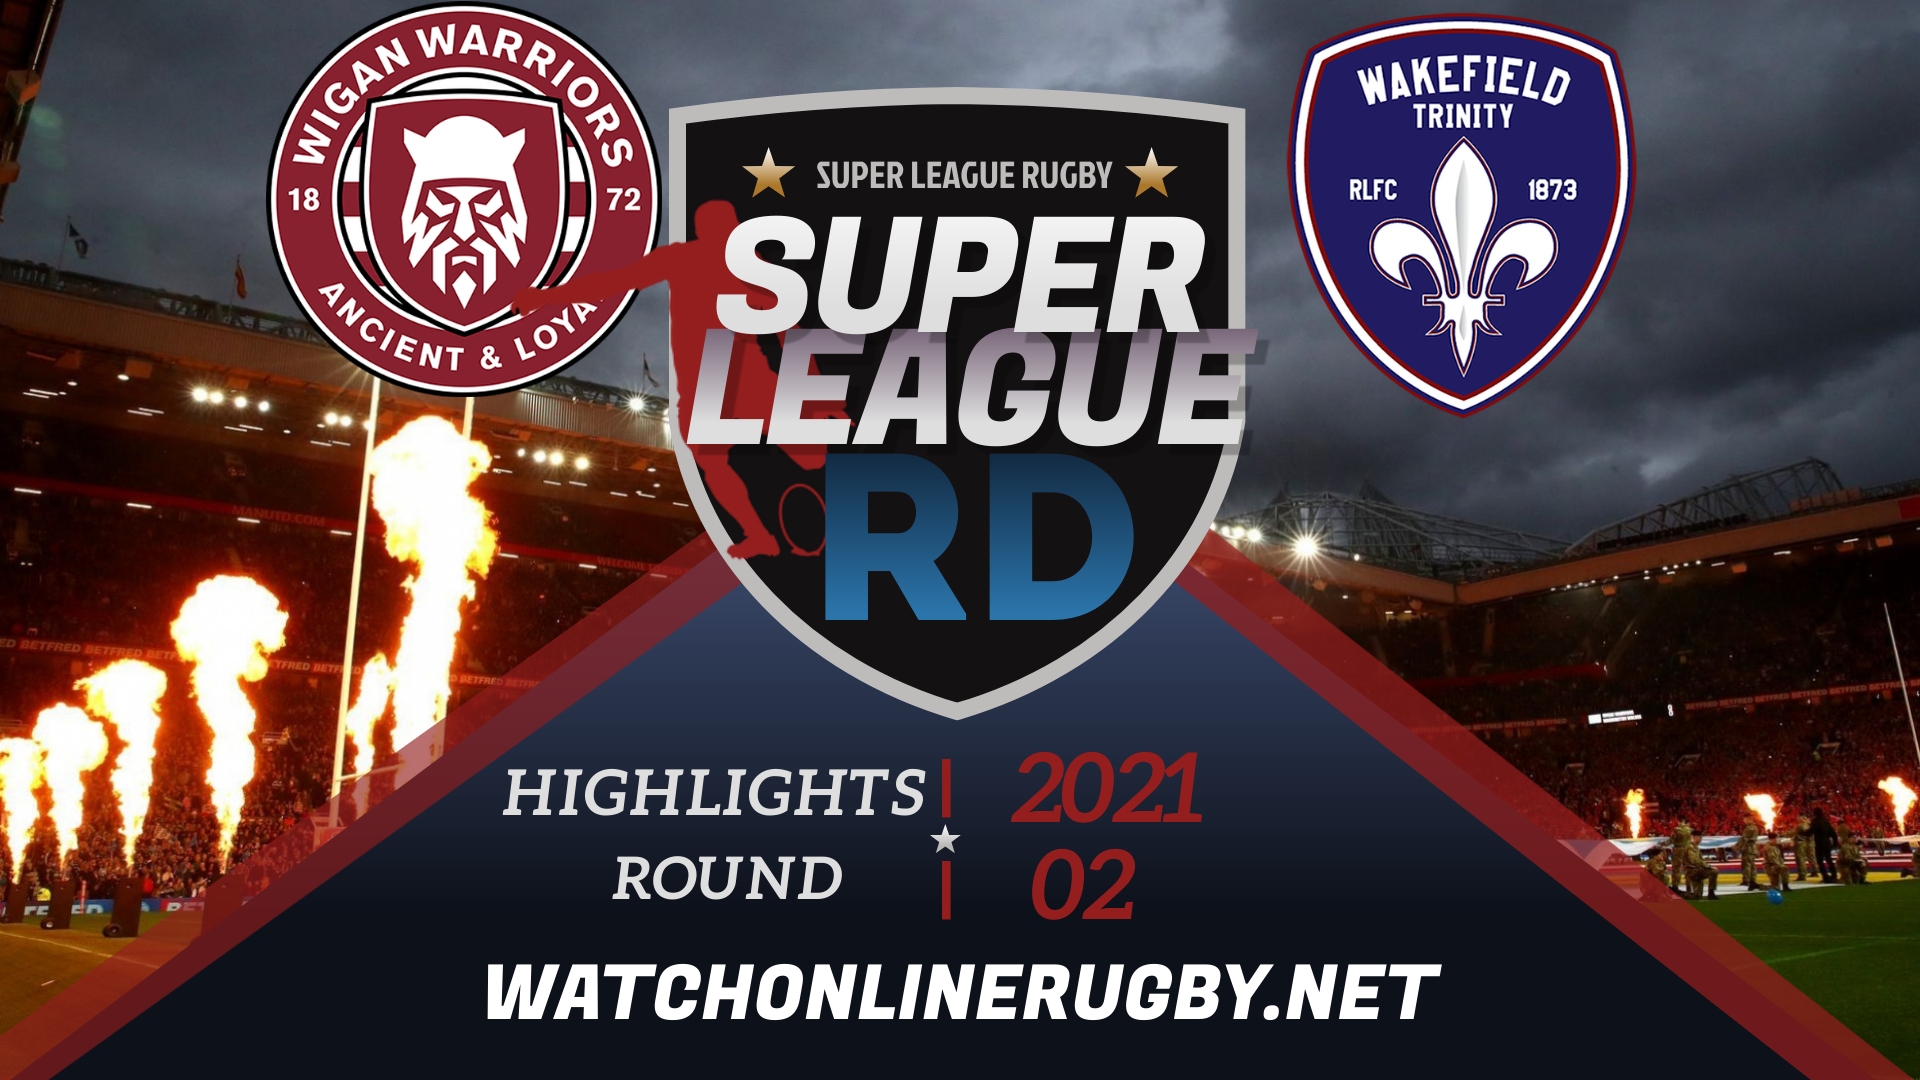 Wigan Warriors Vs Wakefield Trinity Super League Rugby 2021 RD 2